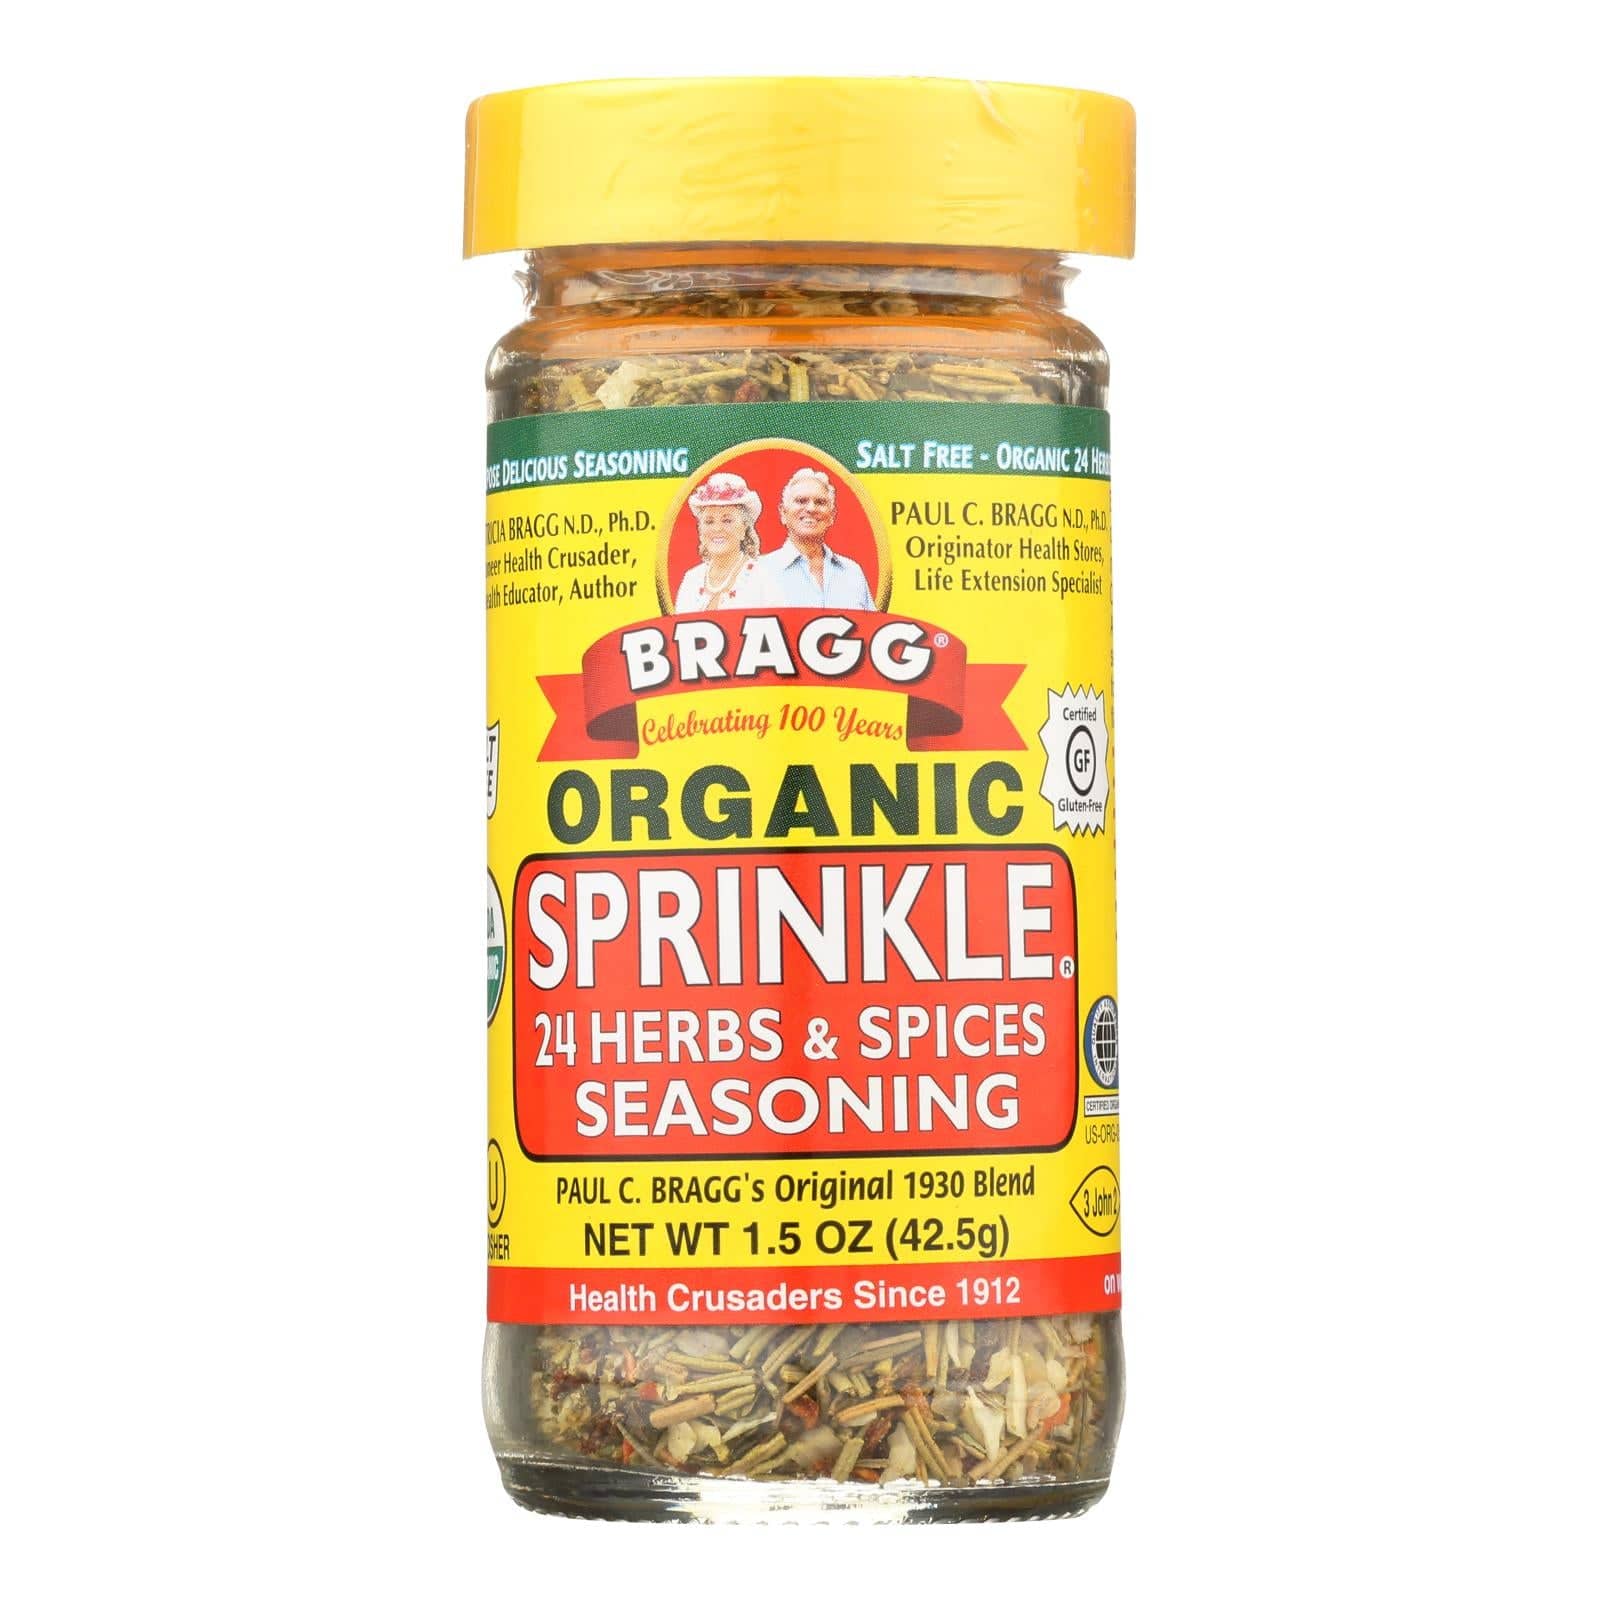 Buy Bragg - Seasoning - Organic - Bragg - Sprinkle - Natural Herbs And Spices - 1.5 Oz - Case Of 12  at OnlyNaturals.us